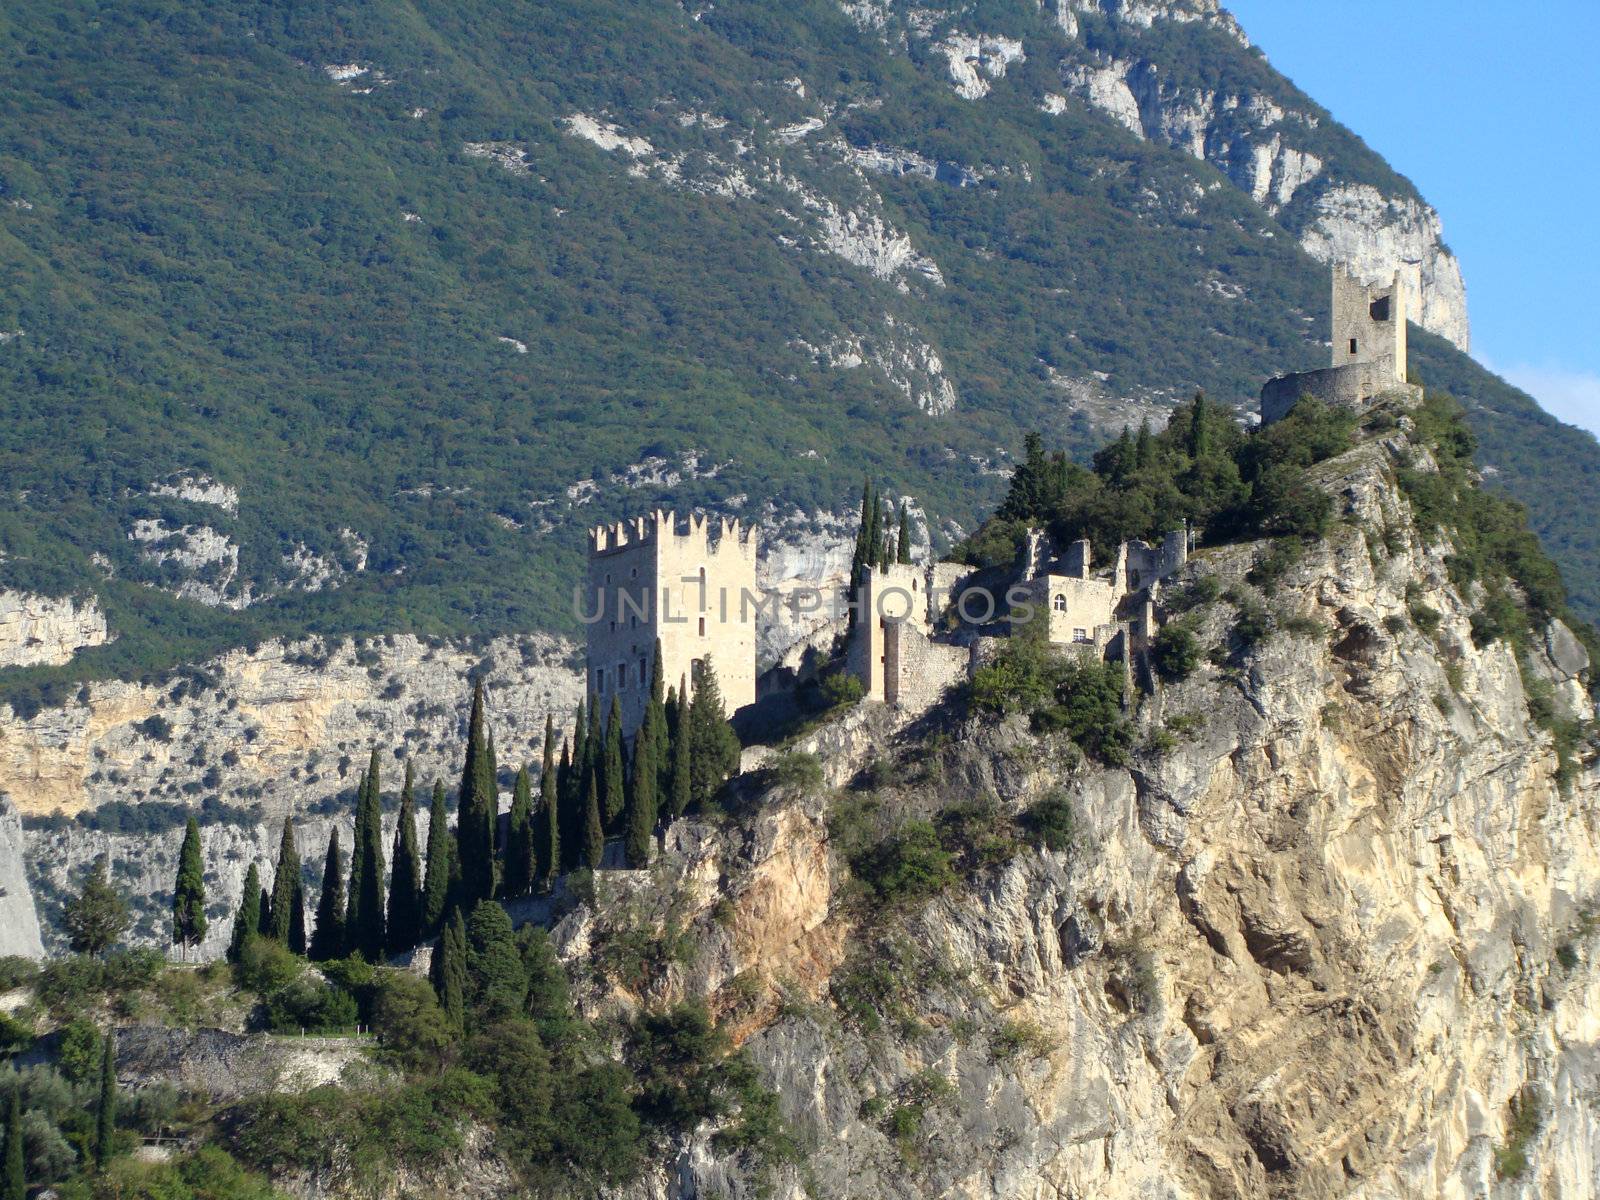 Castle of Arco in Italy, district of Lake Garda.